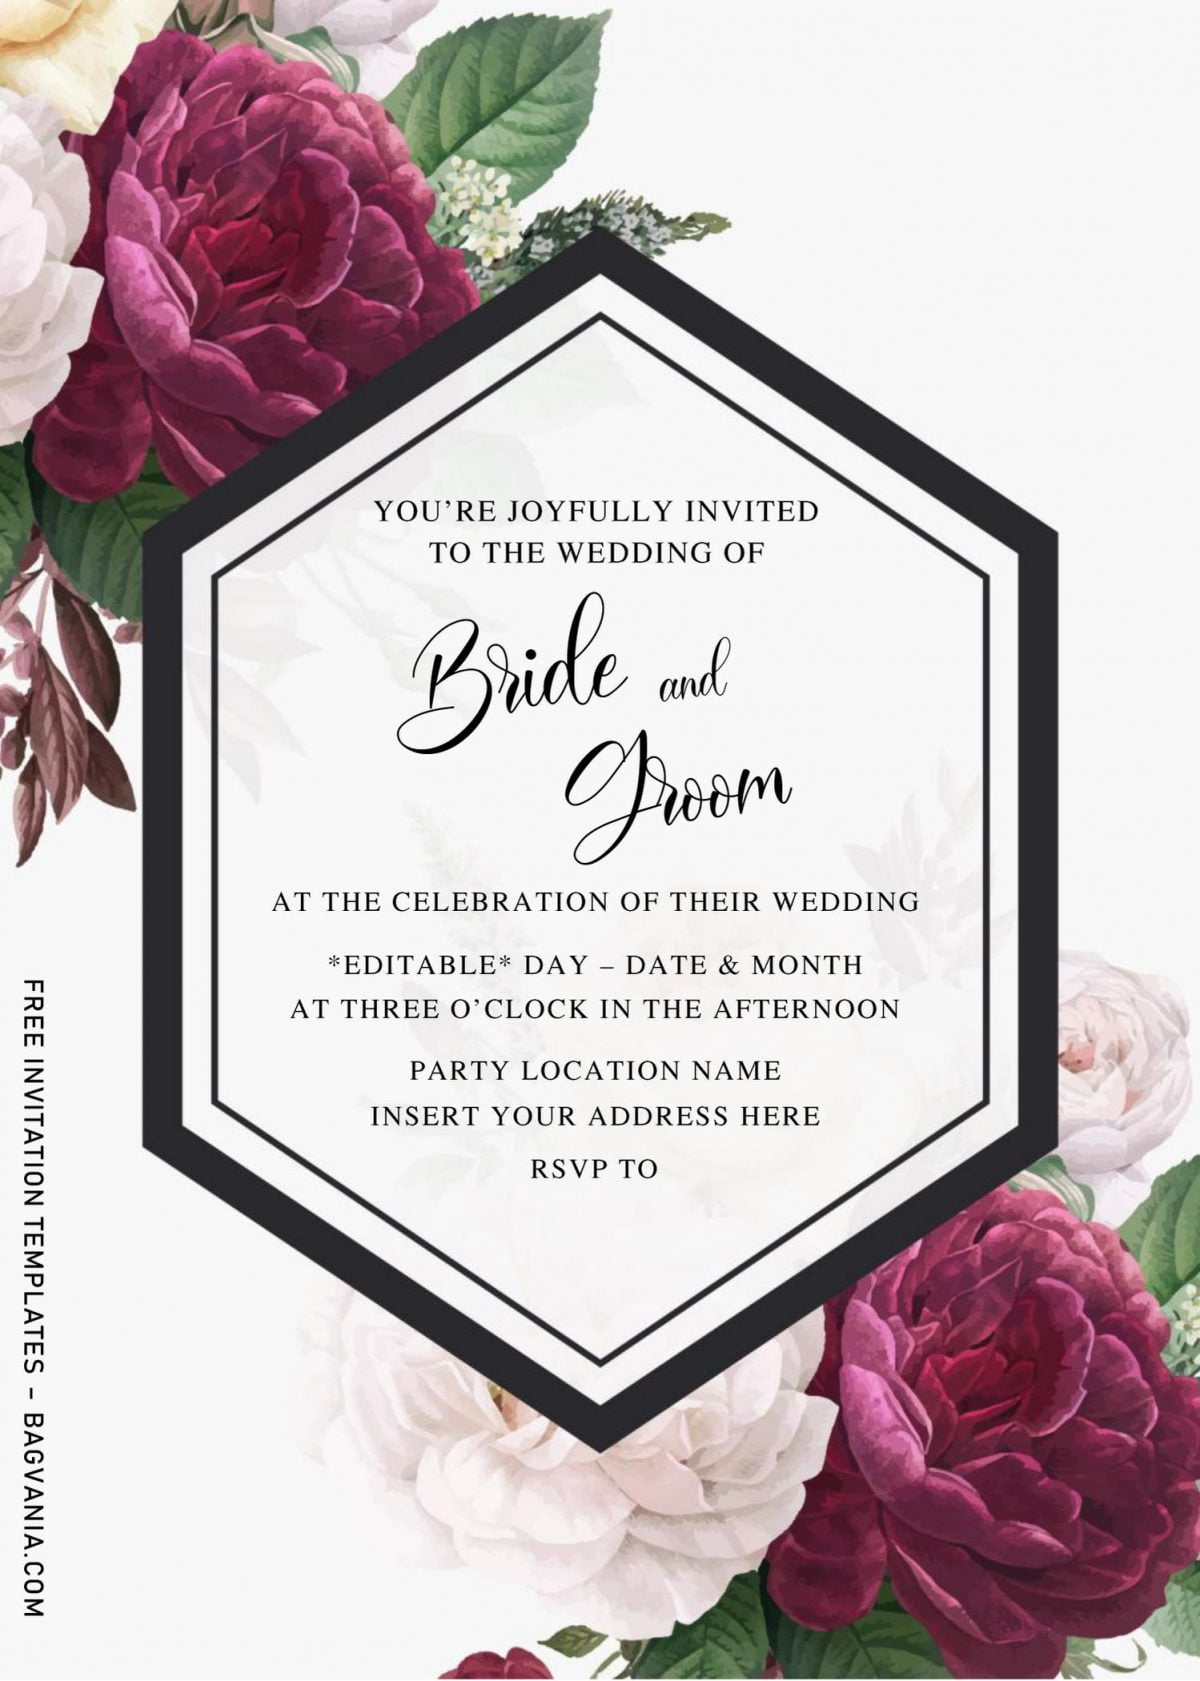 Free Burgundy Floral Wedding Invitation Templates For Word and has elegant typography